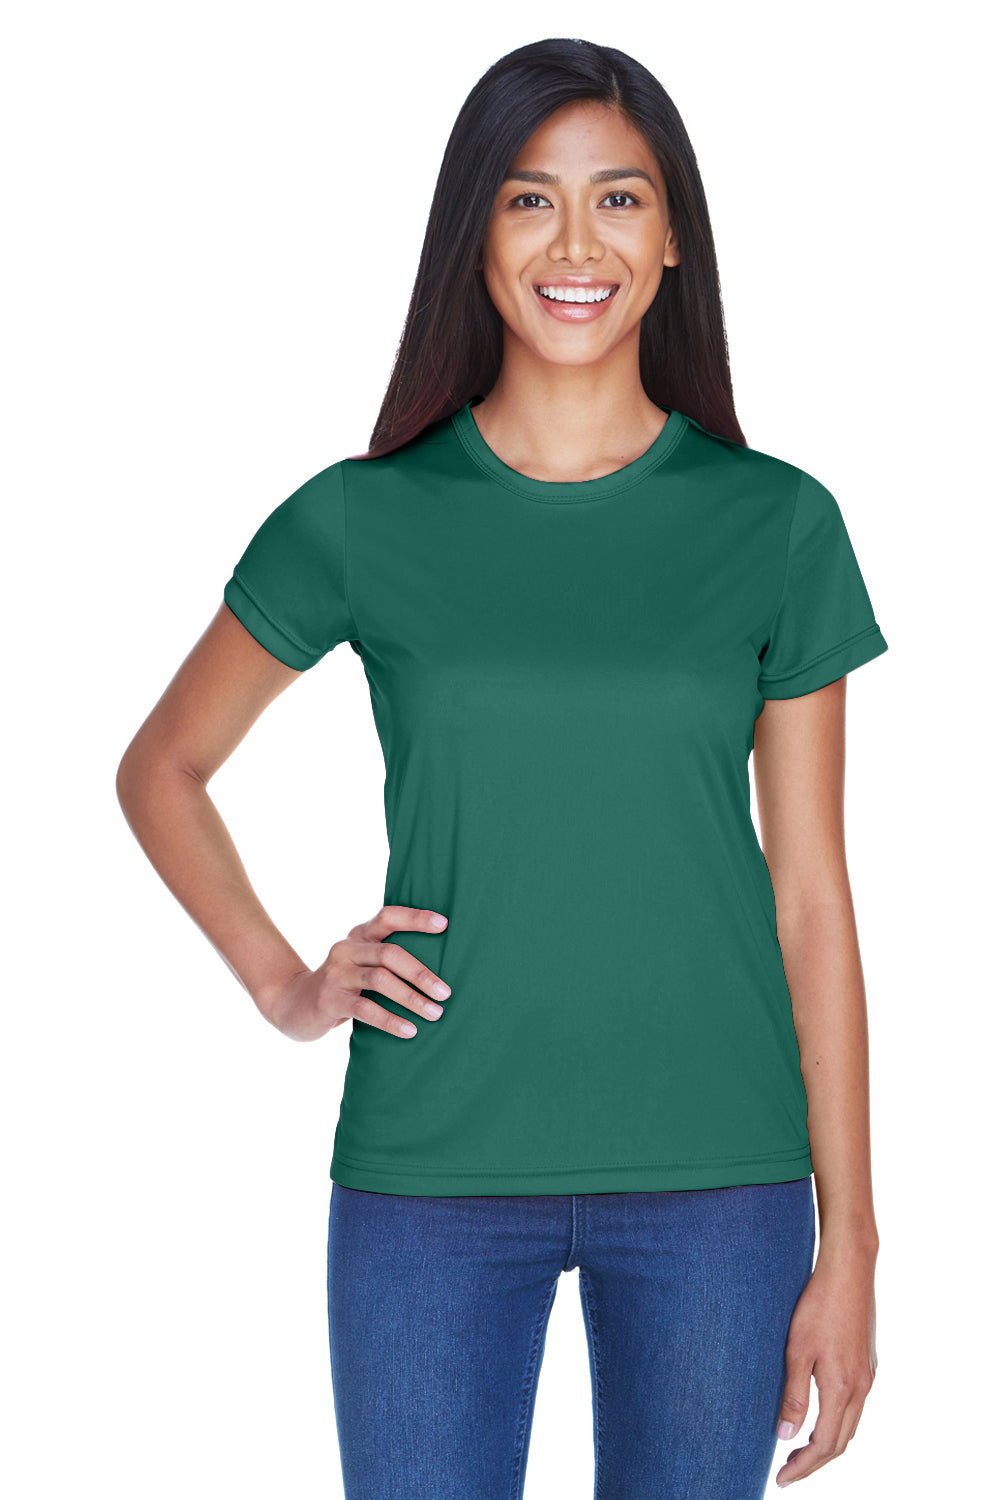 UltraClub 8420L Womens Cool & Dry Performance Moisture Wicking Short Sleeve Crewneck T-Shirt Forest Green Front